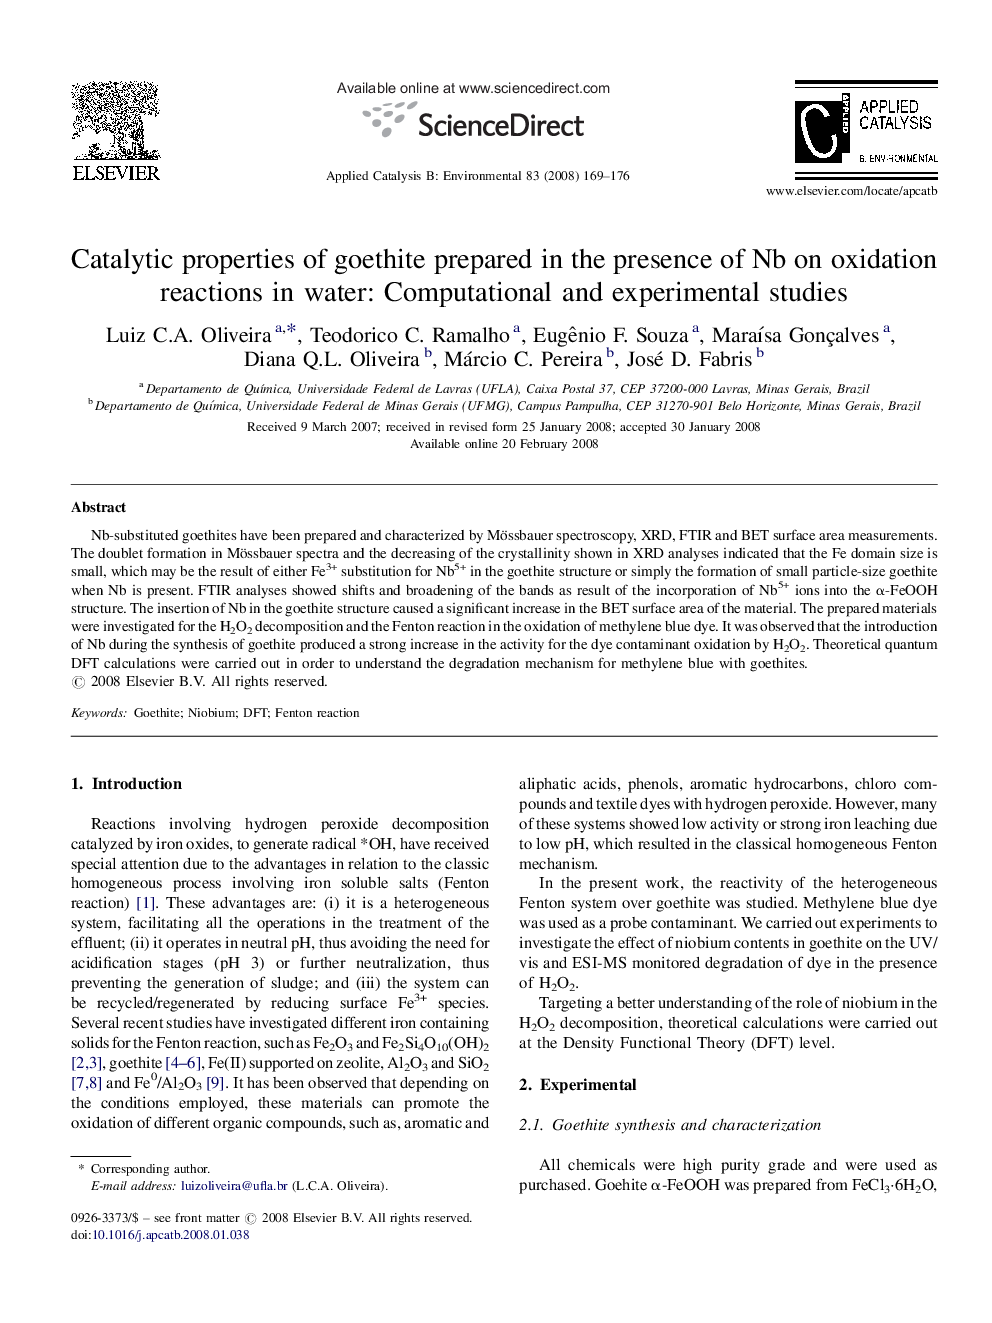 Catalytic properties of goethite prepared in the presence of Nb on oxidation reactions in water: Computational and experimental studies